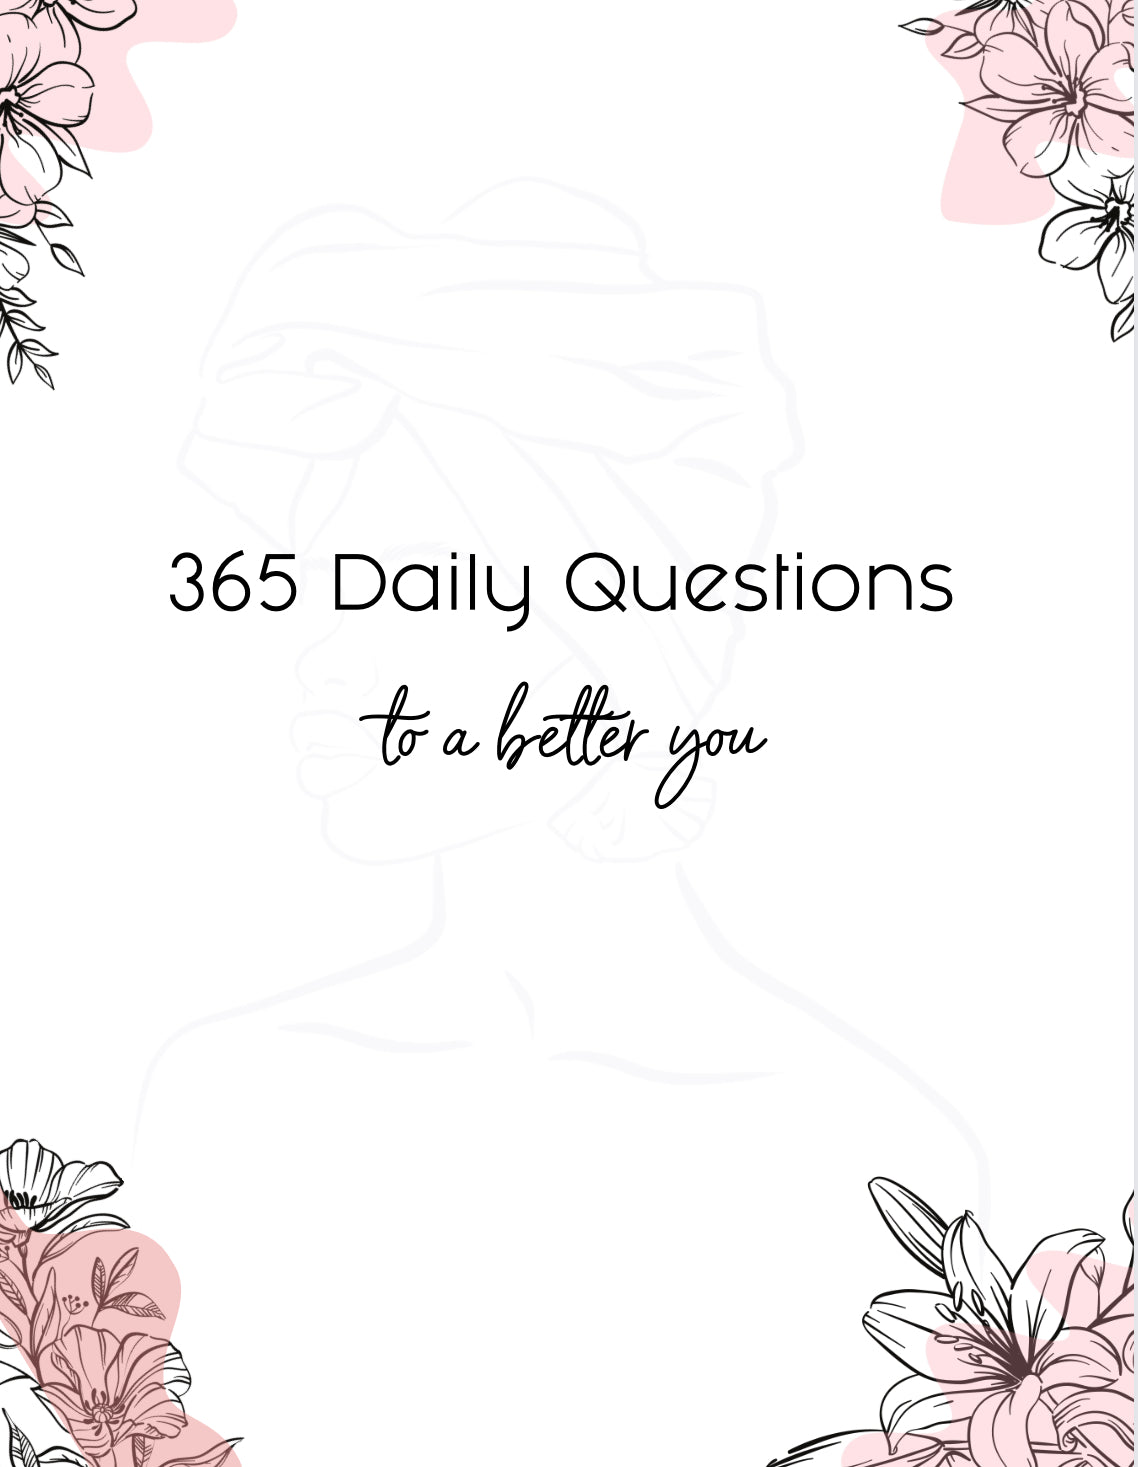 365 Questions to a Better You [Journal]